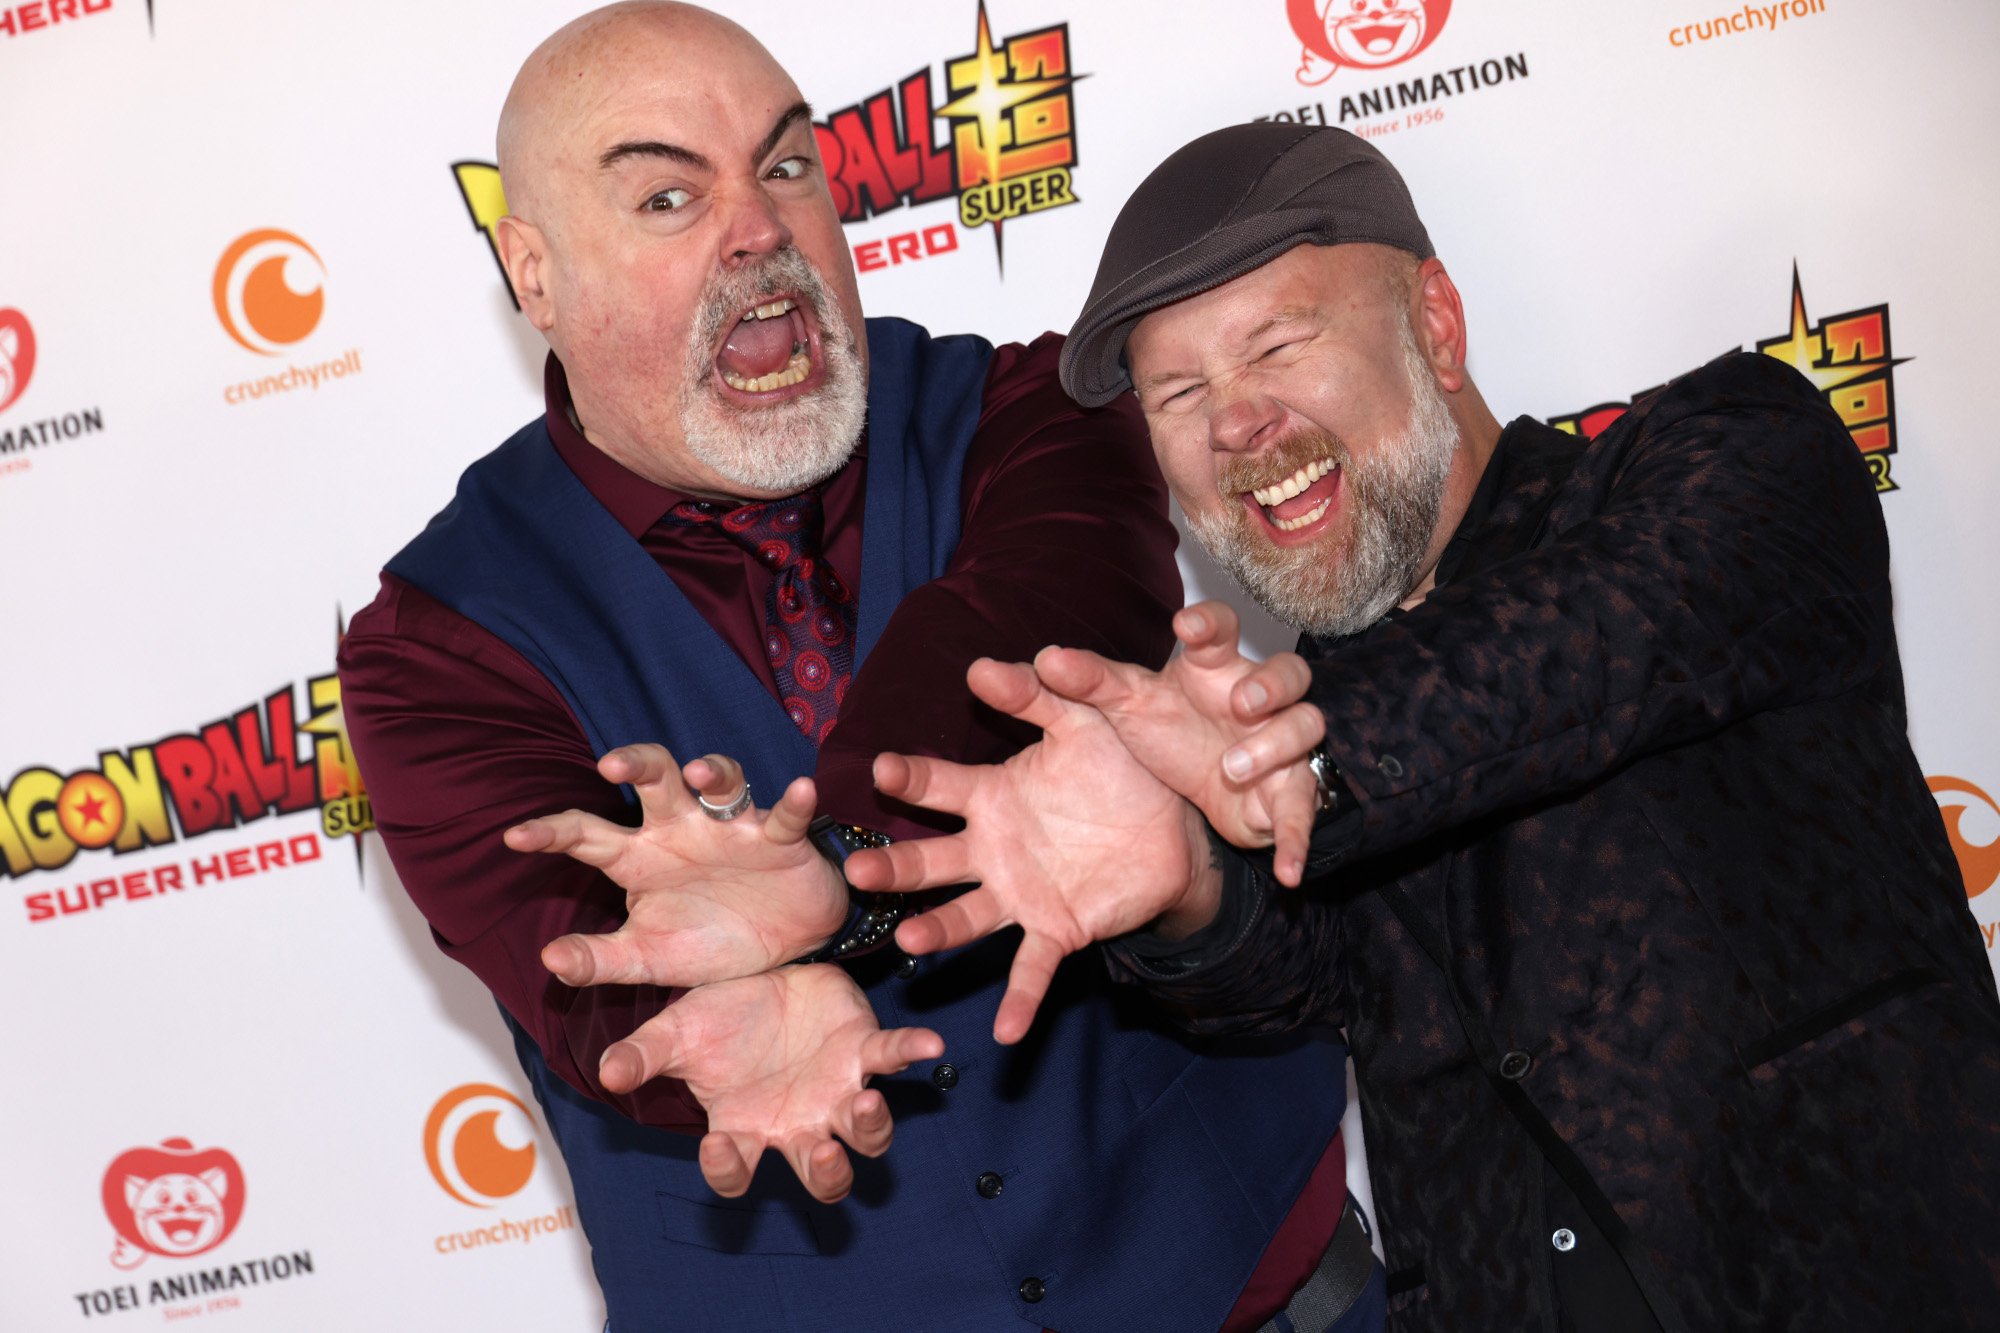 'Dragon Ball Super: Super Hero' cast members Kyle Hebert and Christopher Sabat at the movie's premiere. They're laughing and holding out their hands.